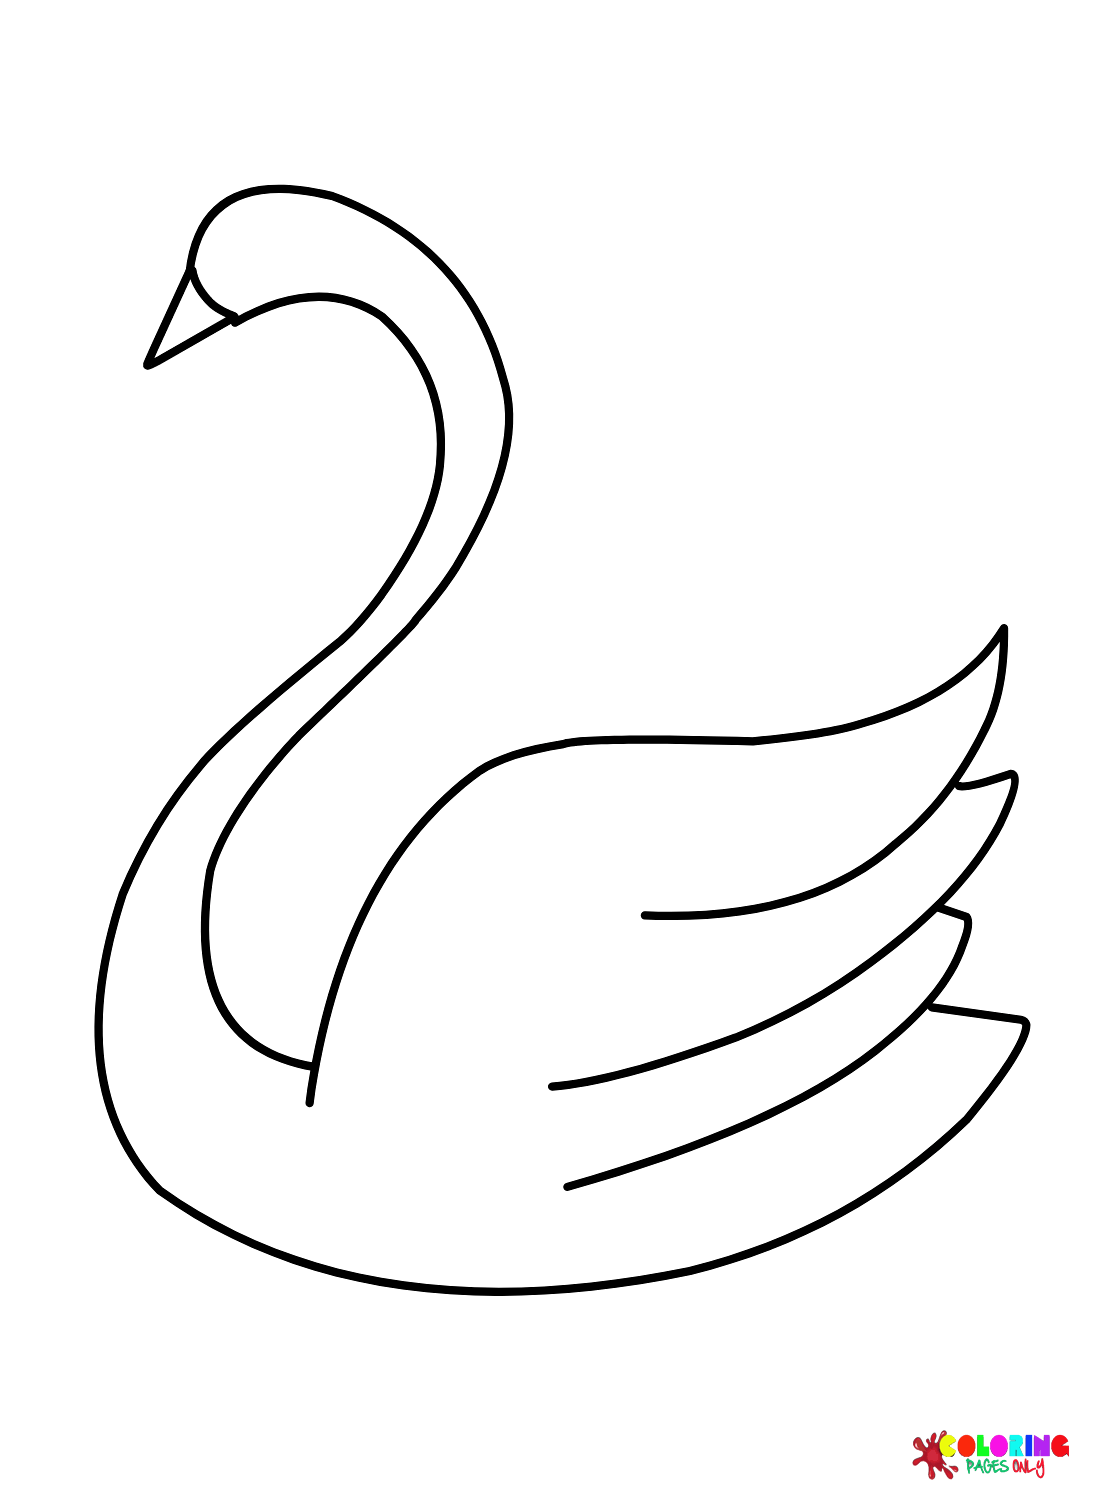 Swan for Kids Coloring Page - Free Printable Coloring Pages